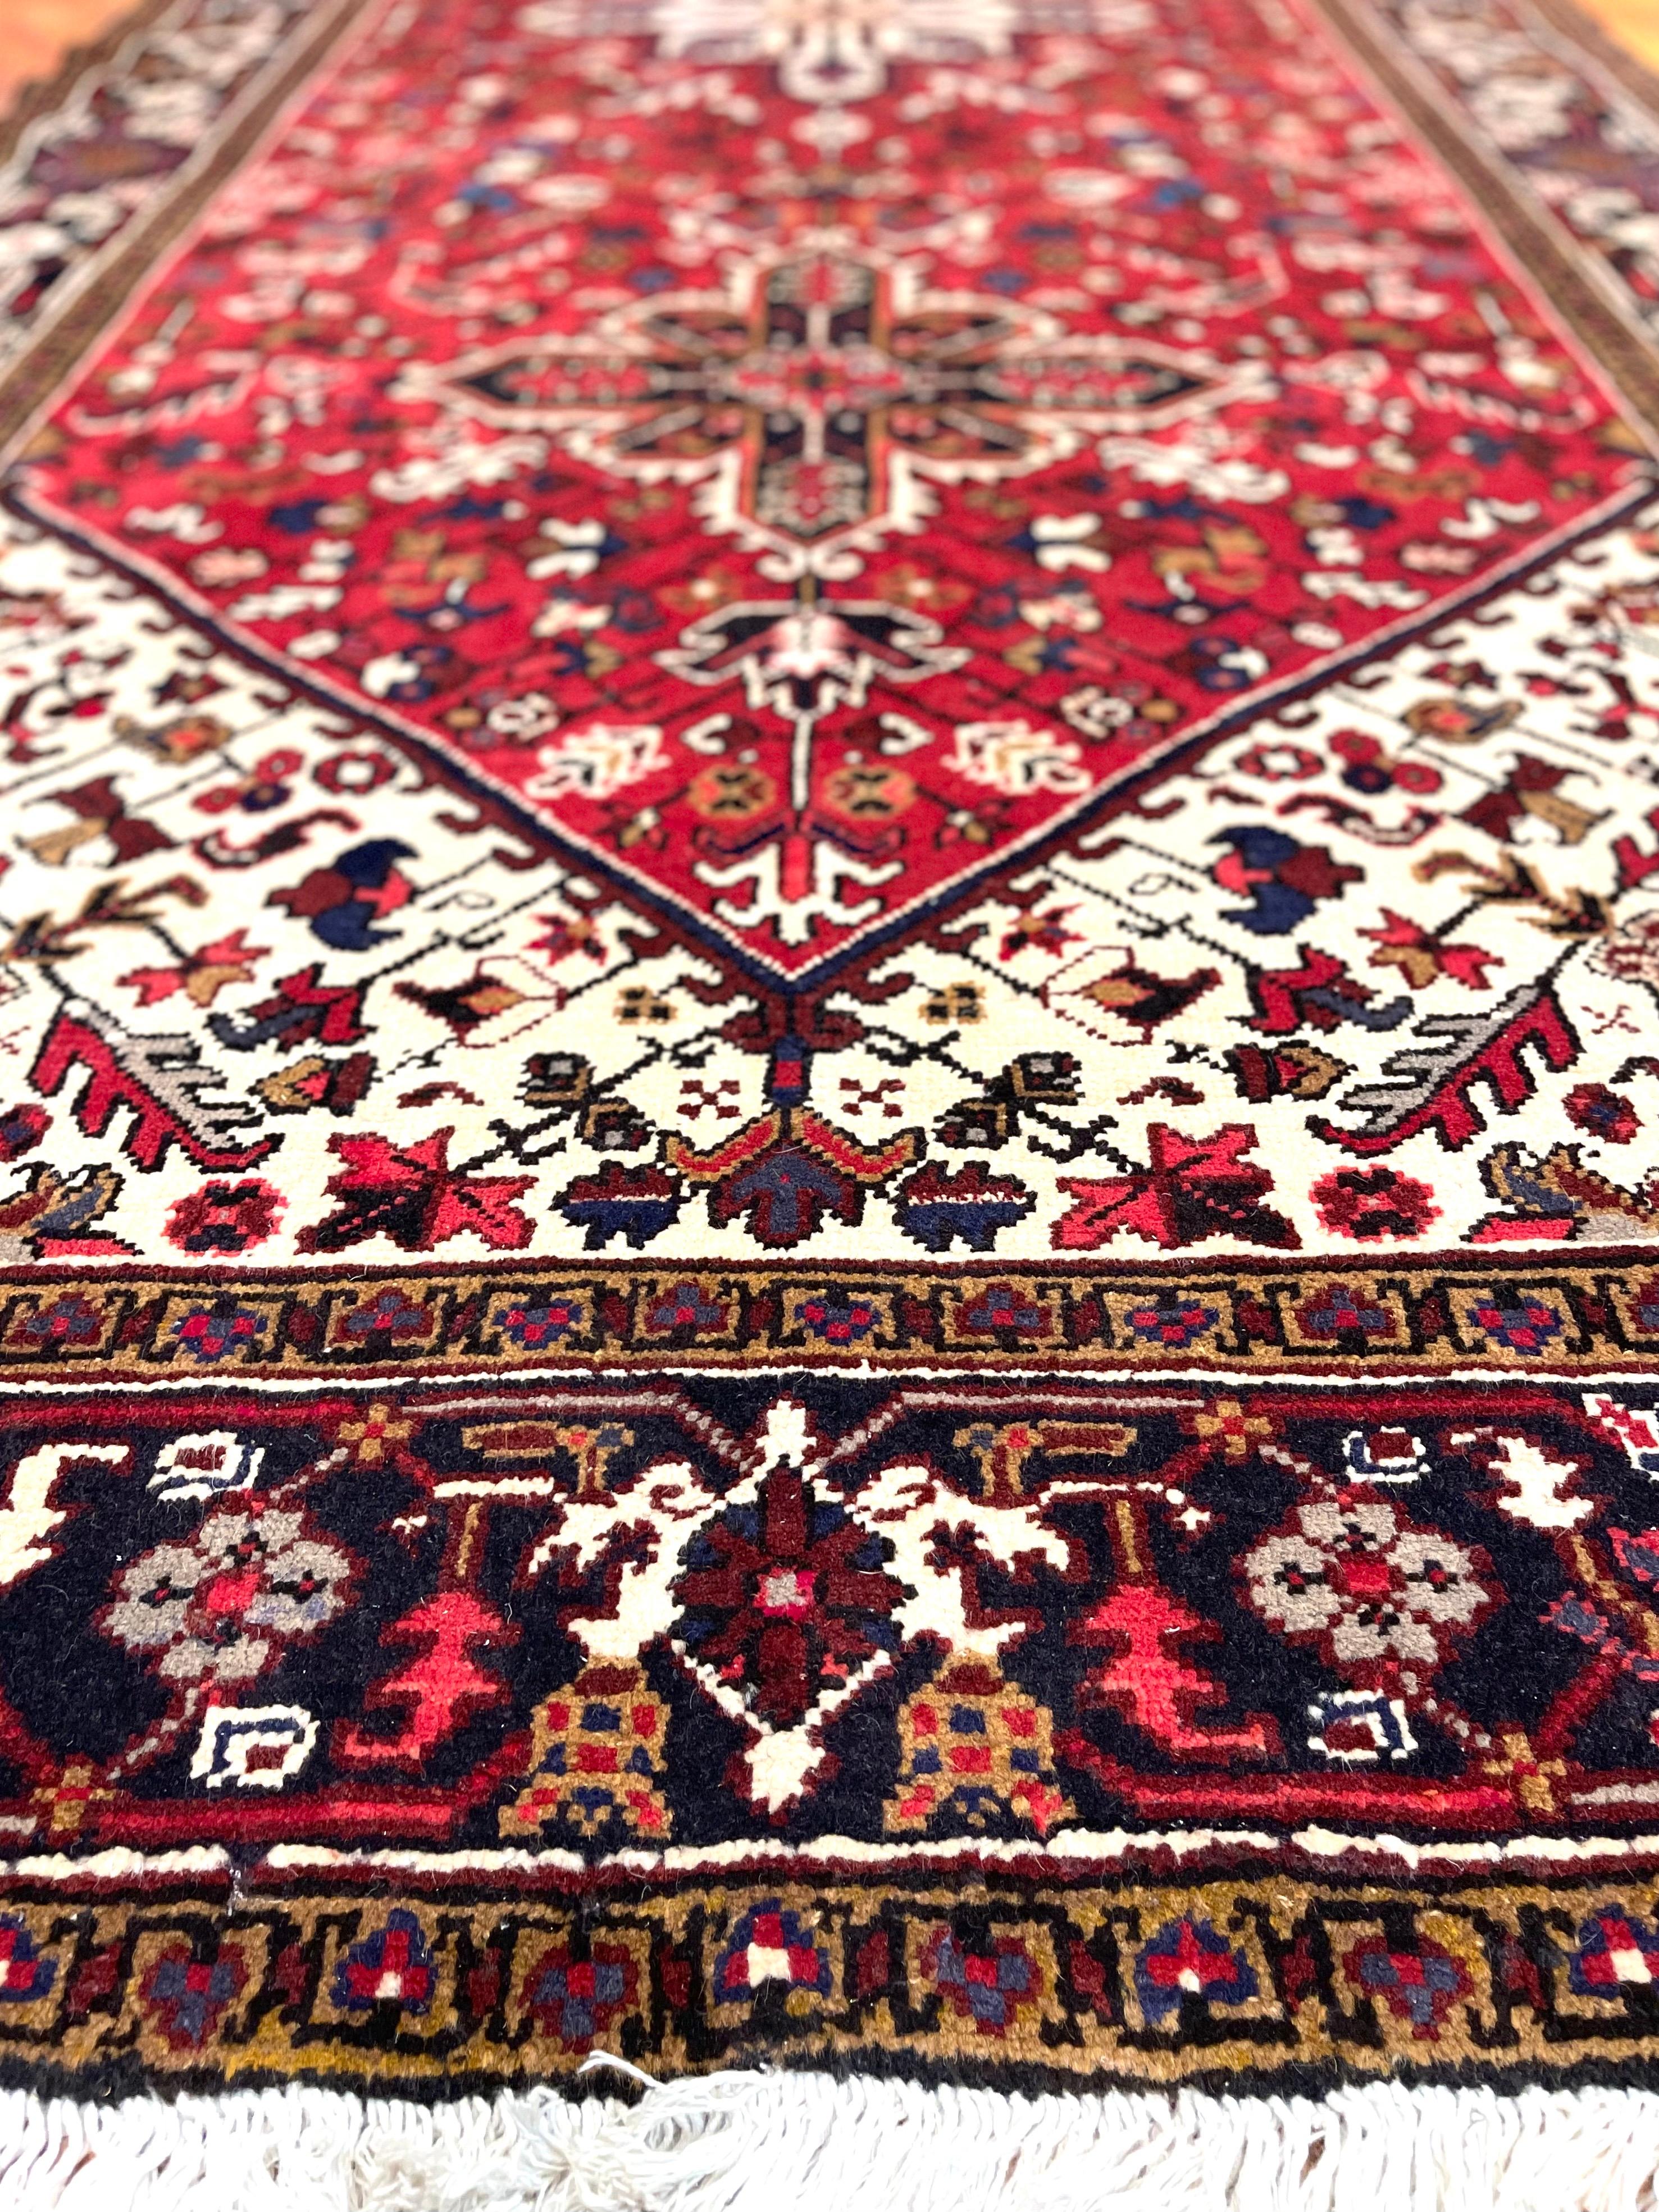 Hand-Knotted Authentic Persian Hand Knotted Red Geometric Heriz Rug 1960 For Sale